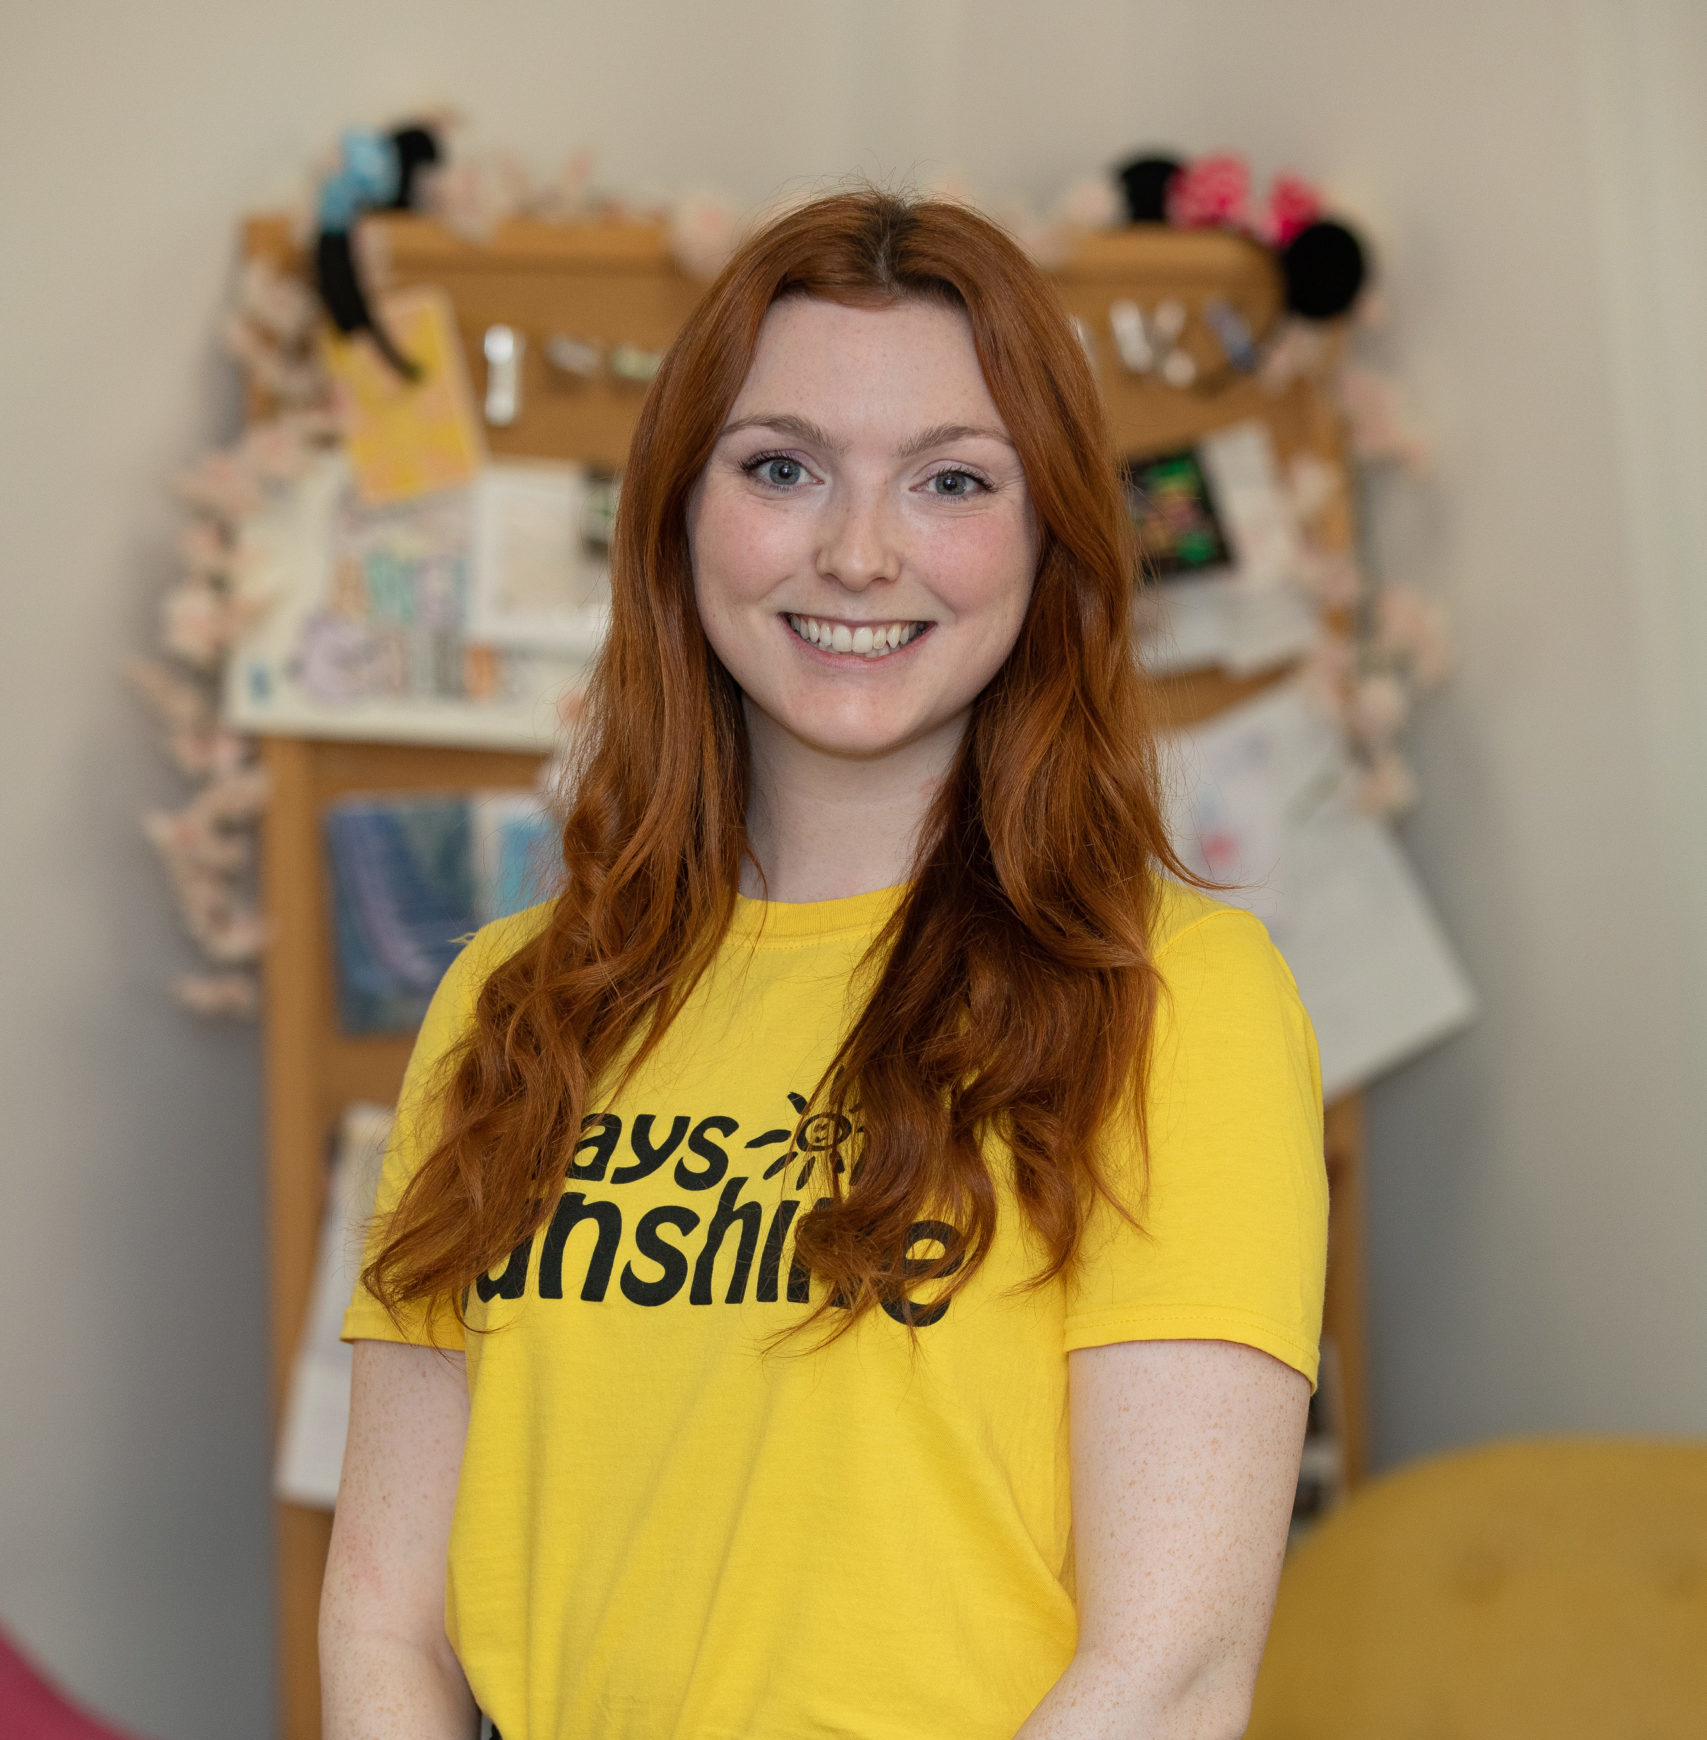 Clodagh is wearing a yellow Rays of Sunshine t-shirt. She is standing. Clodagh has ginger hair